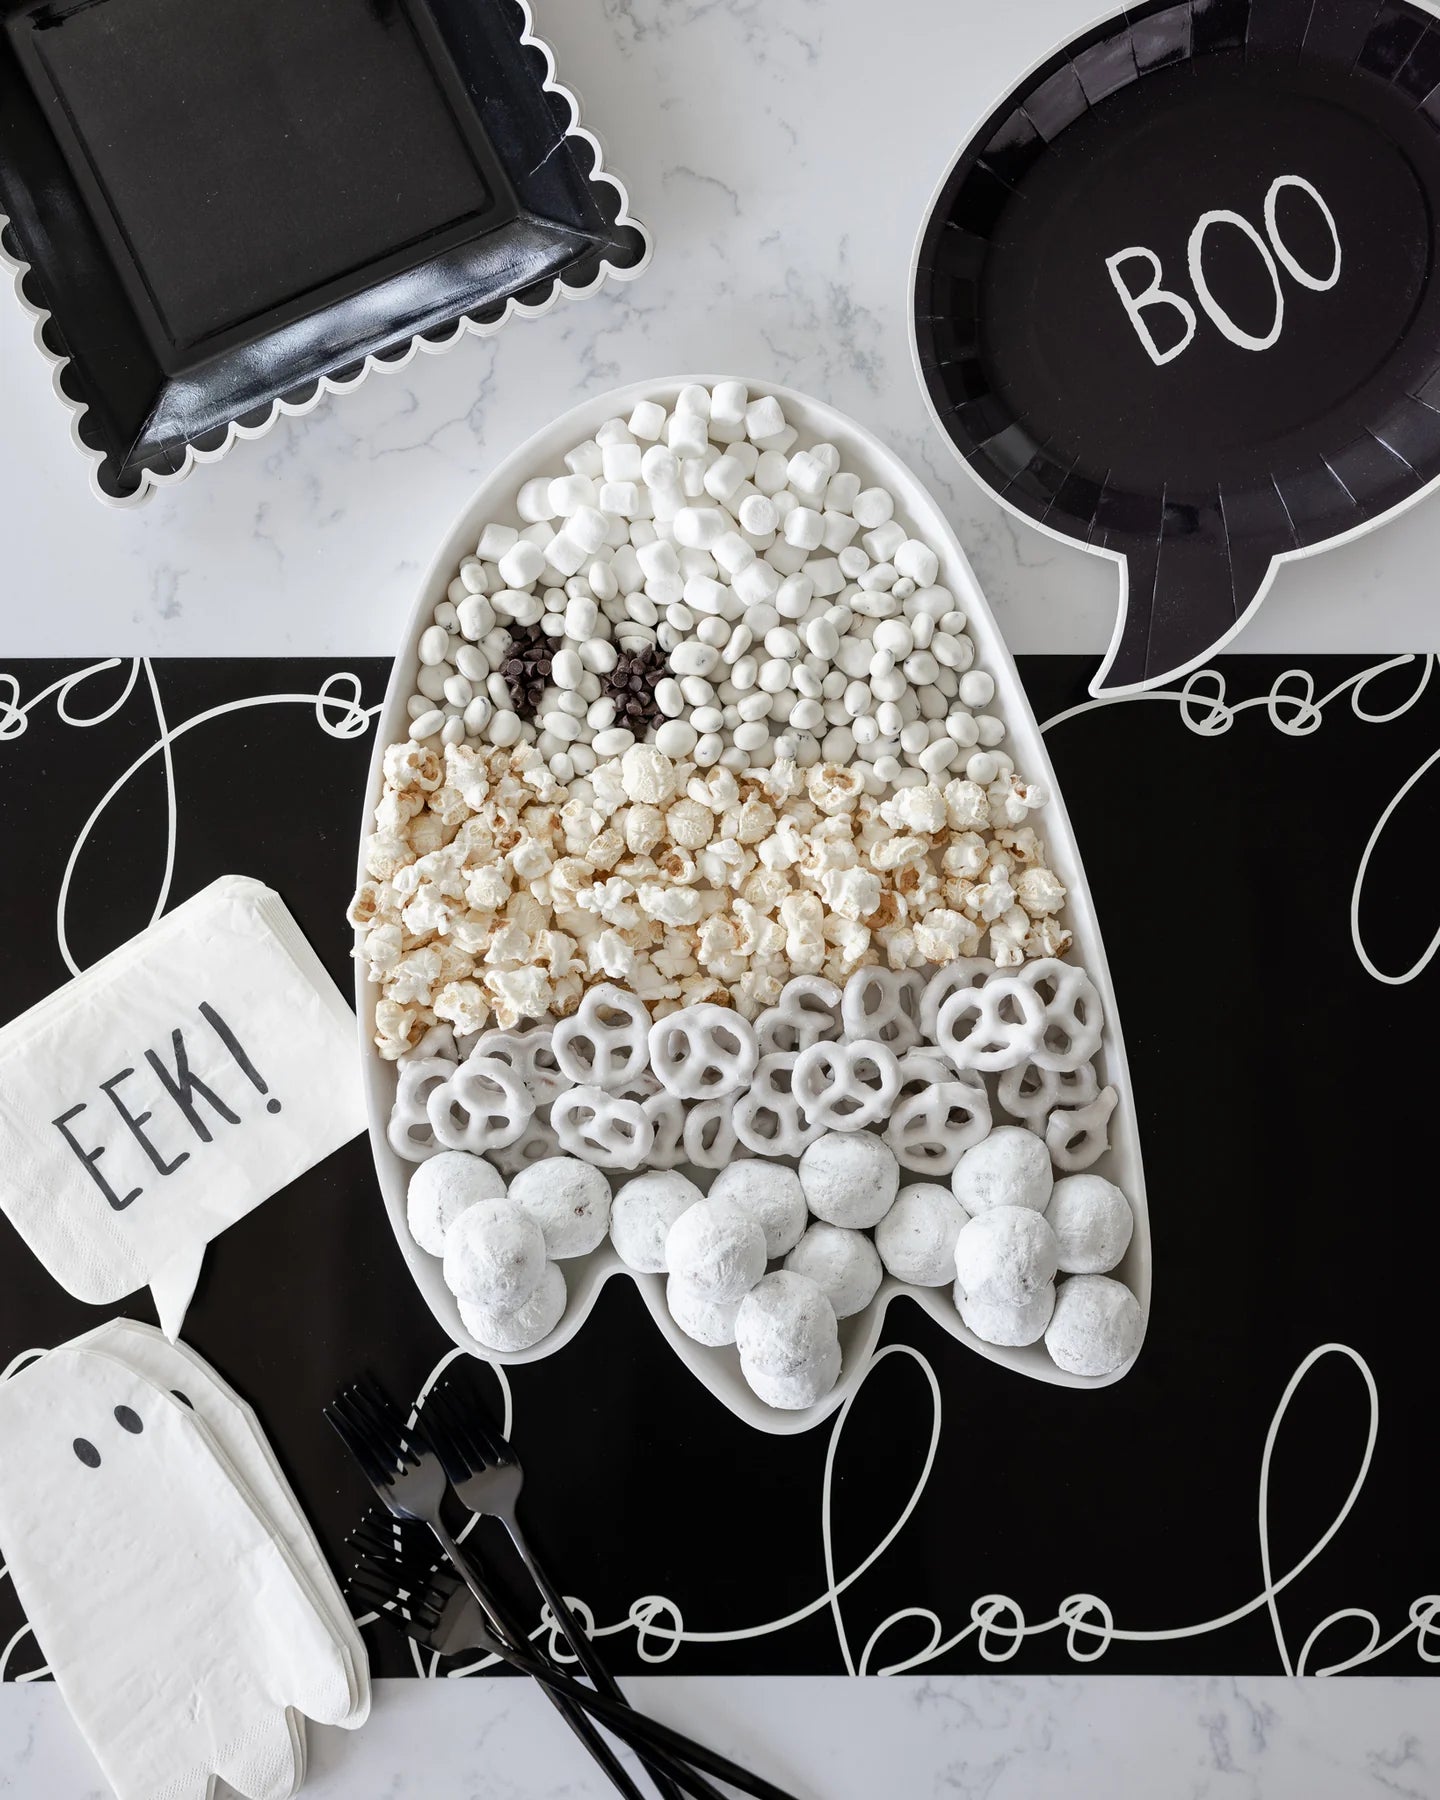 Black Boo Halloween Lunch Plates 8ct | The Party Darling